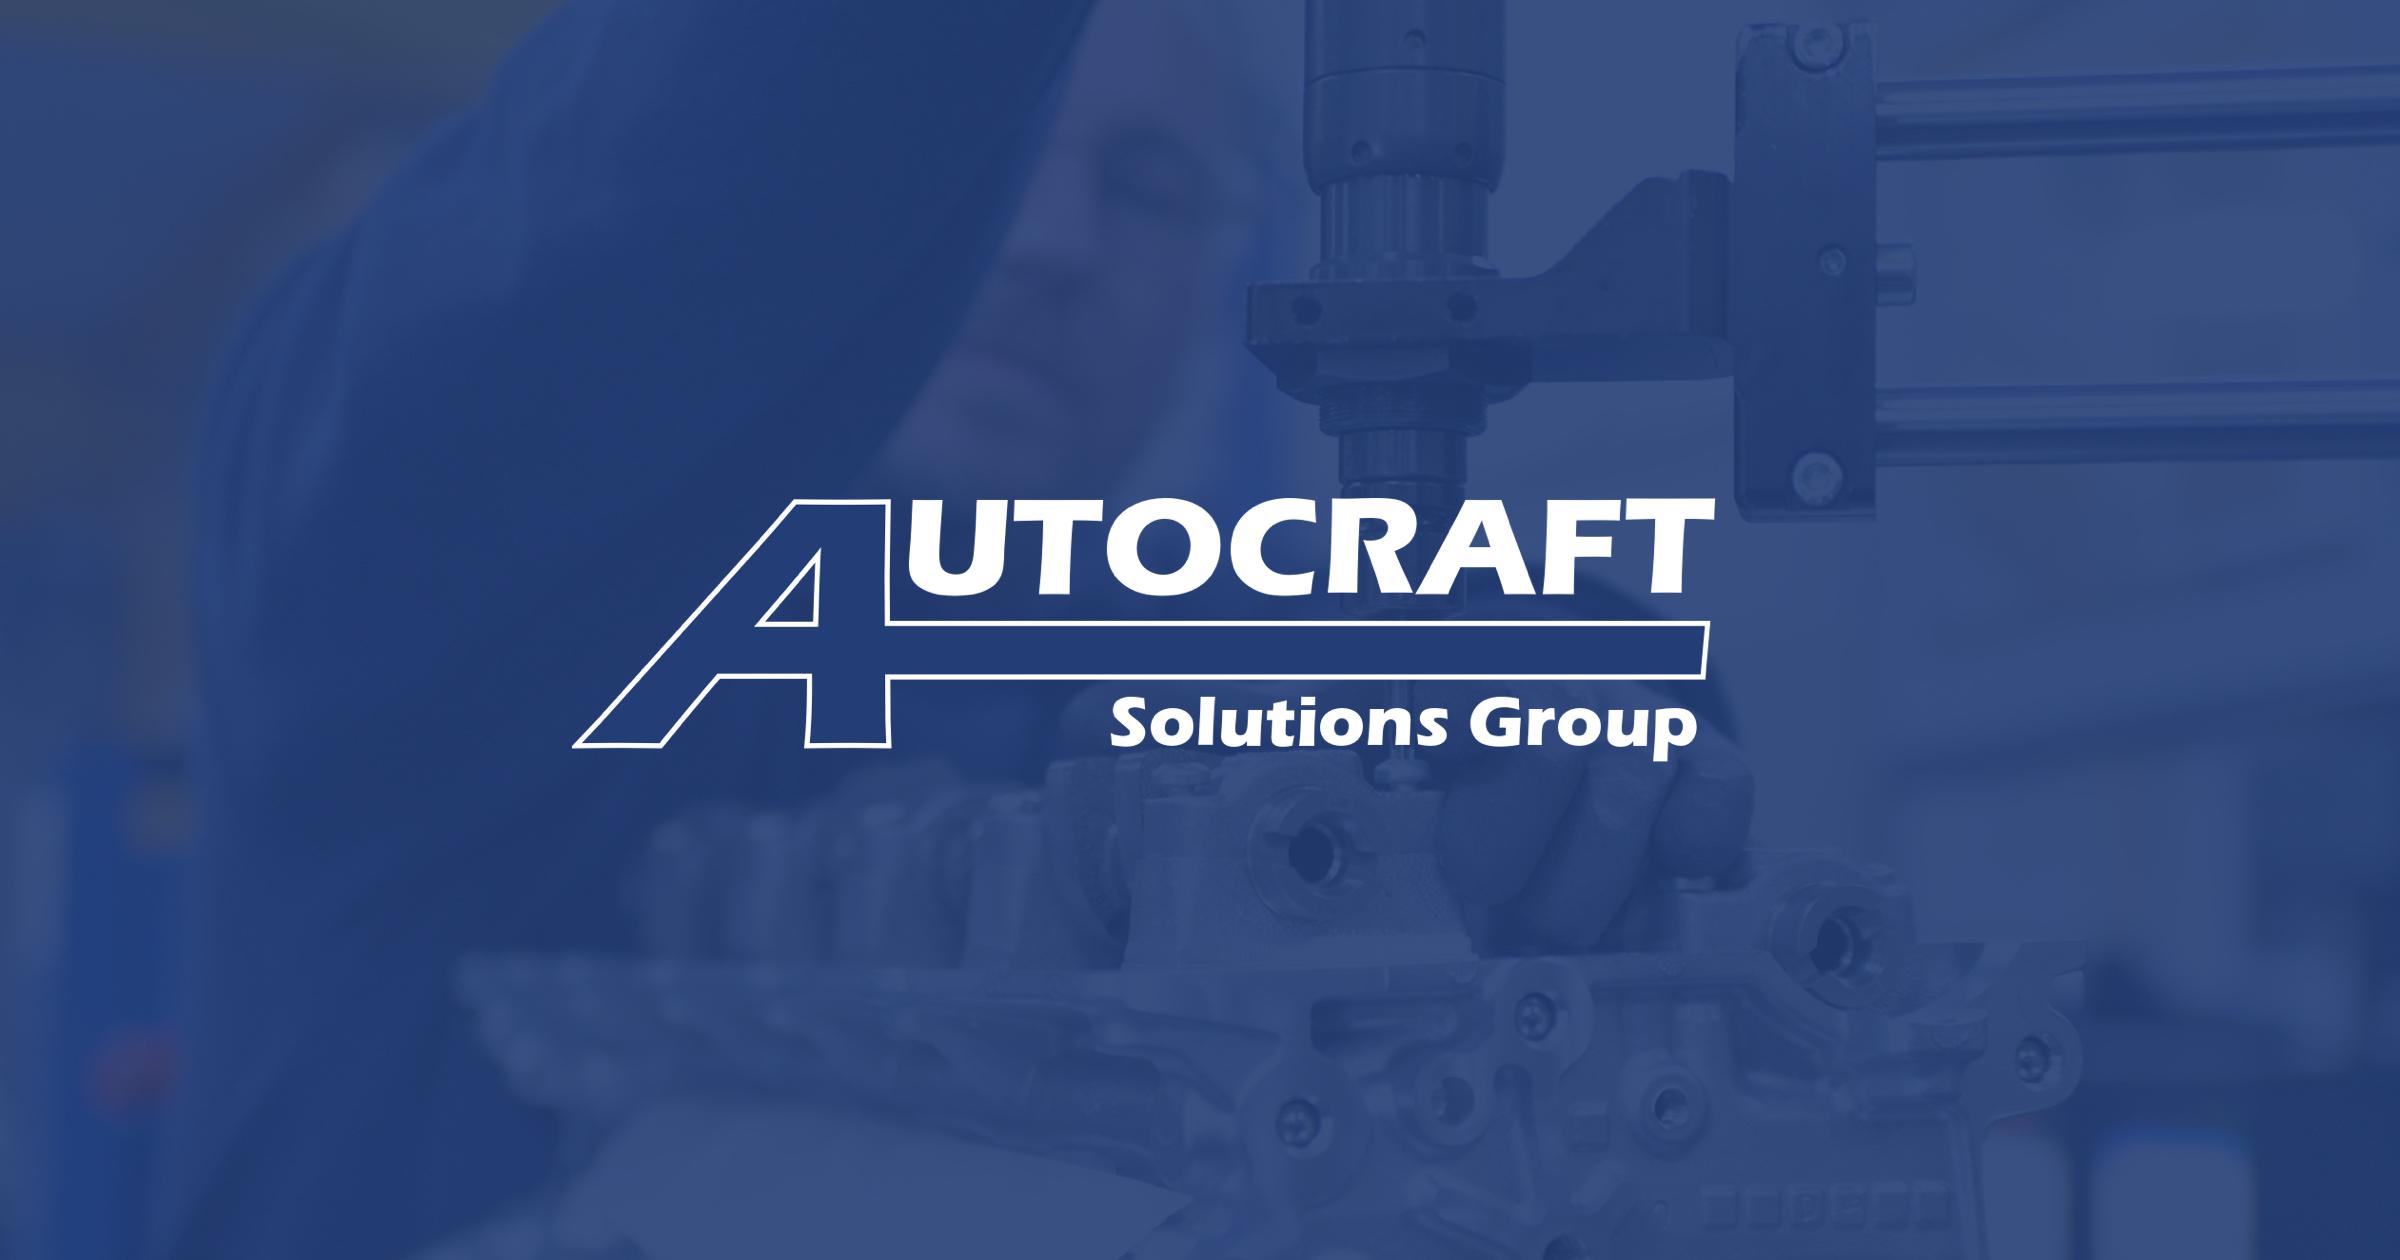 Image for Fixture Design & Manufacture | Autocraft Solutions Group